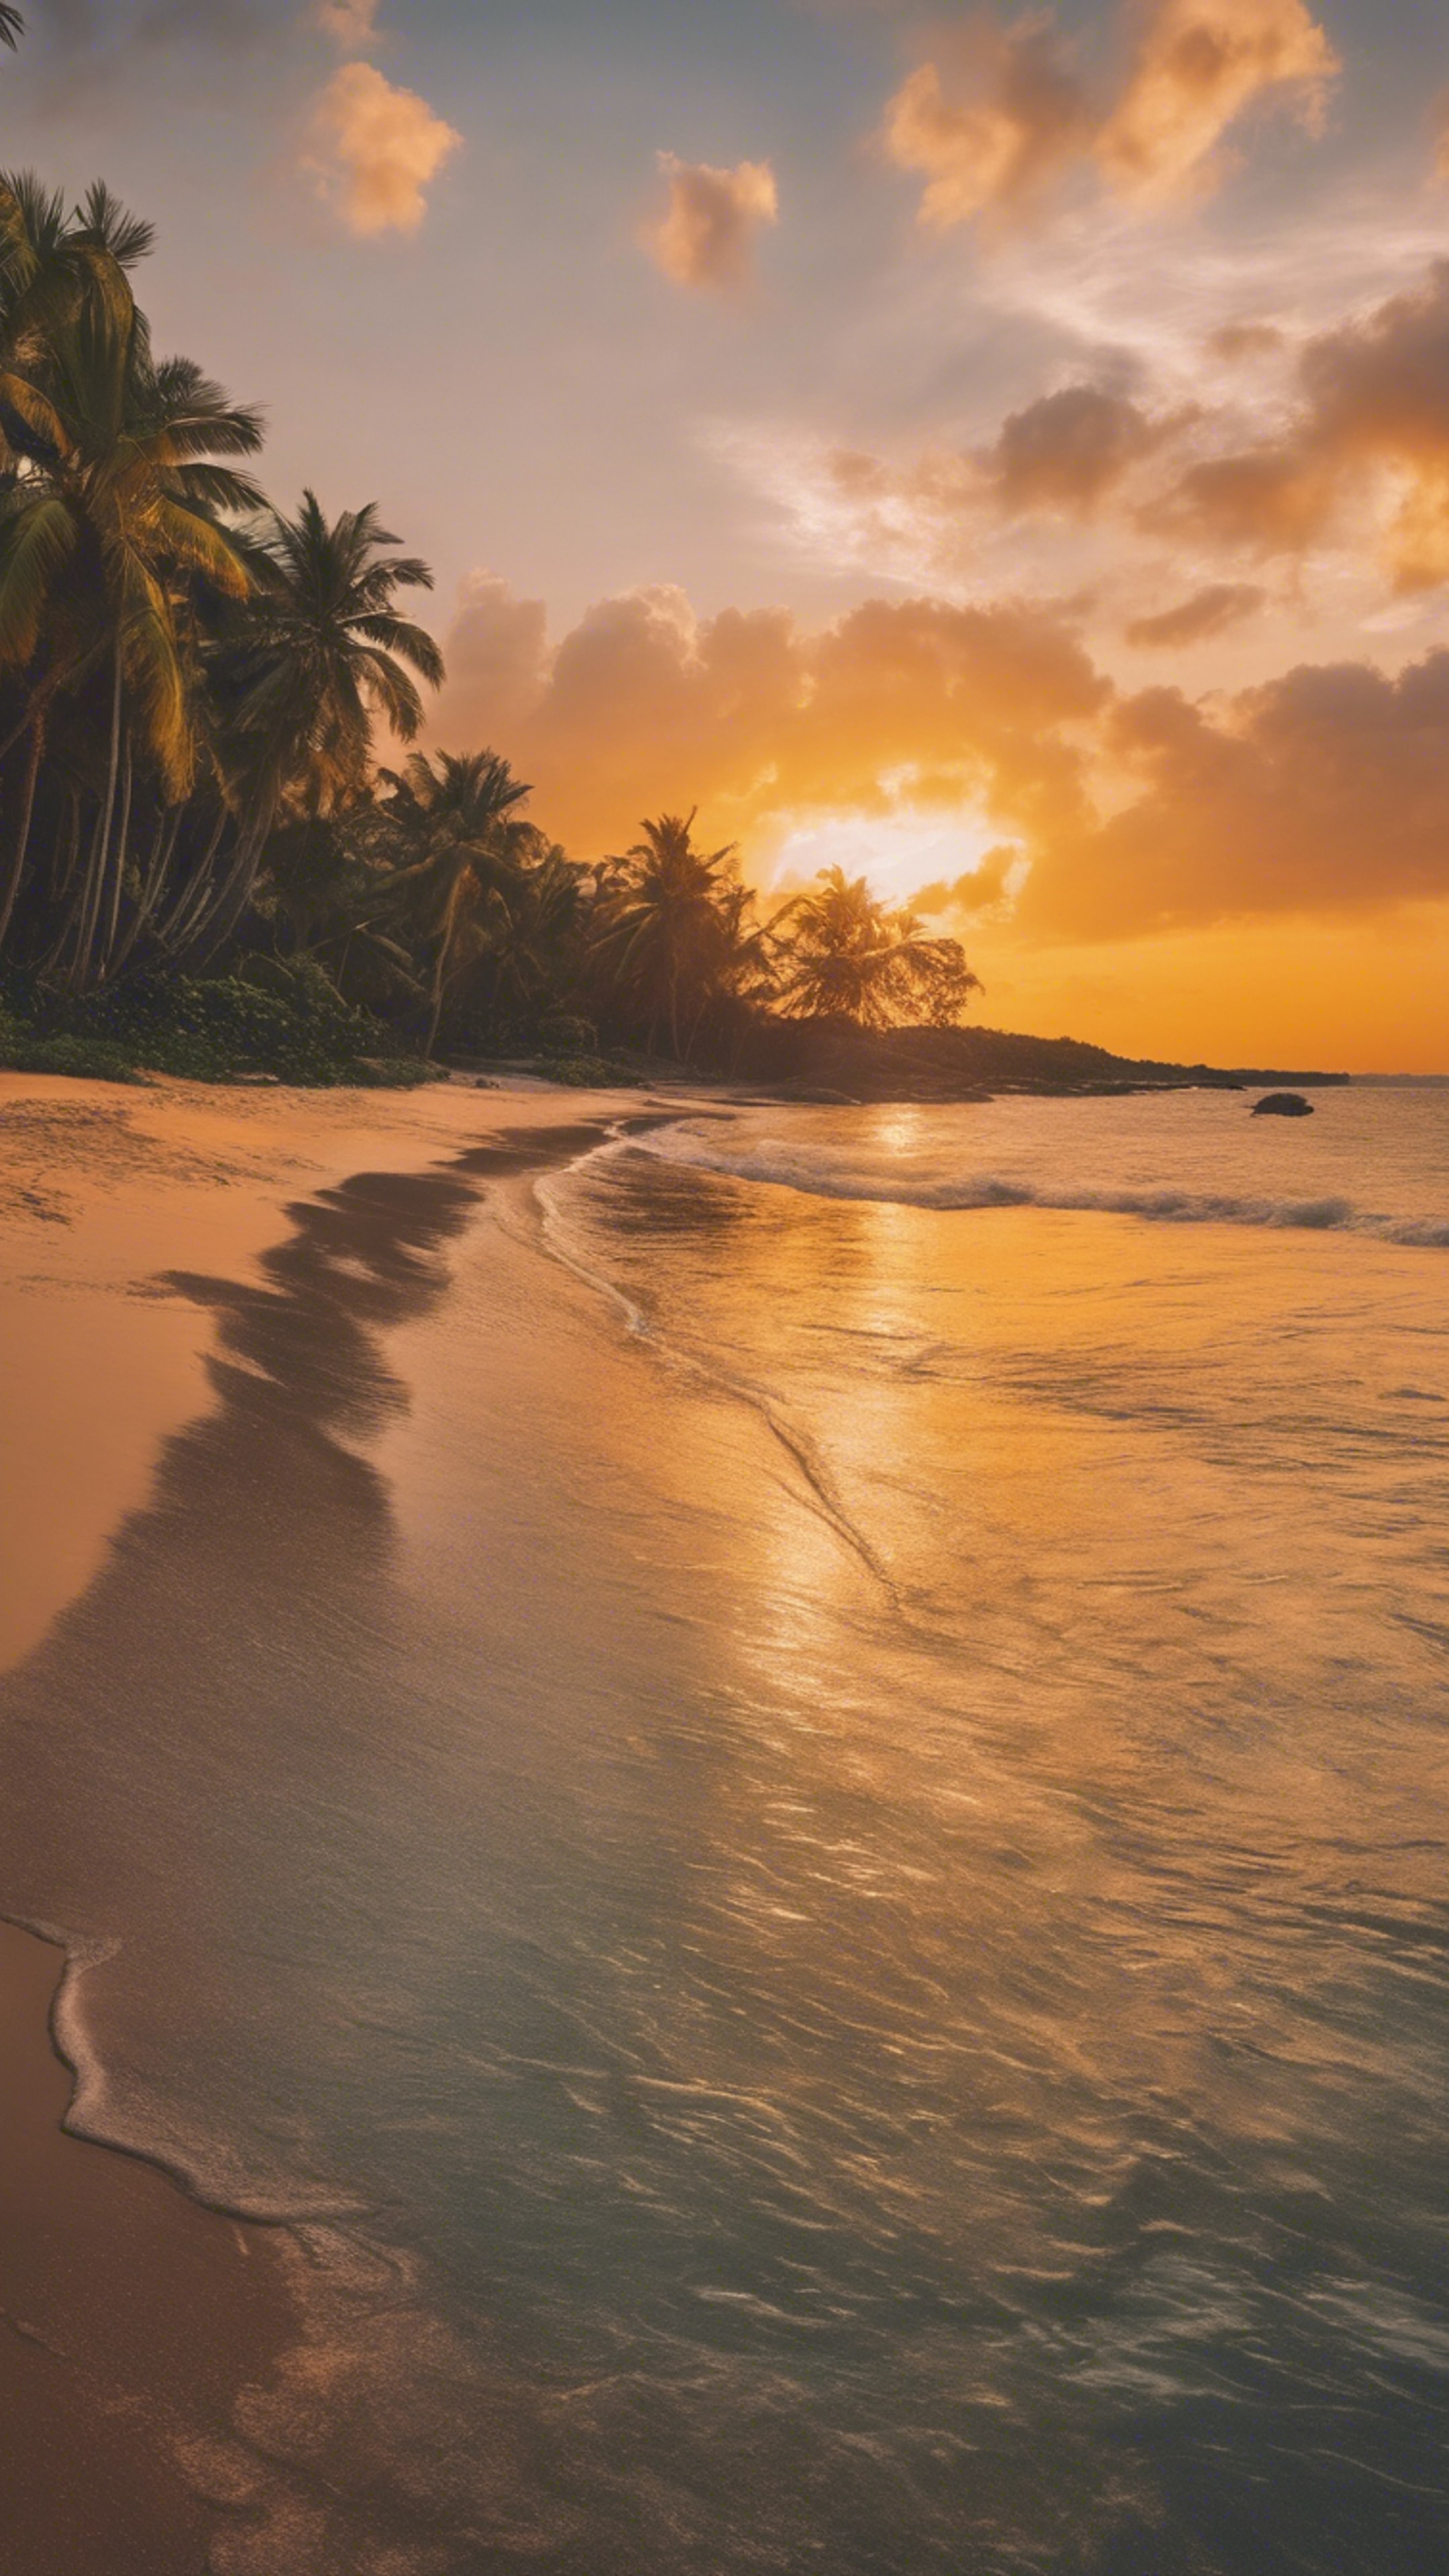 A tropical beach at sunset with hues of orange and yellow gently reflecting on the clear water.壁紙[f1cd0a05f1594f21a6bf]